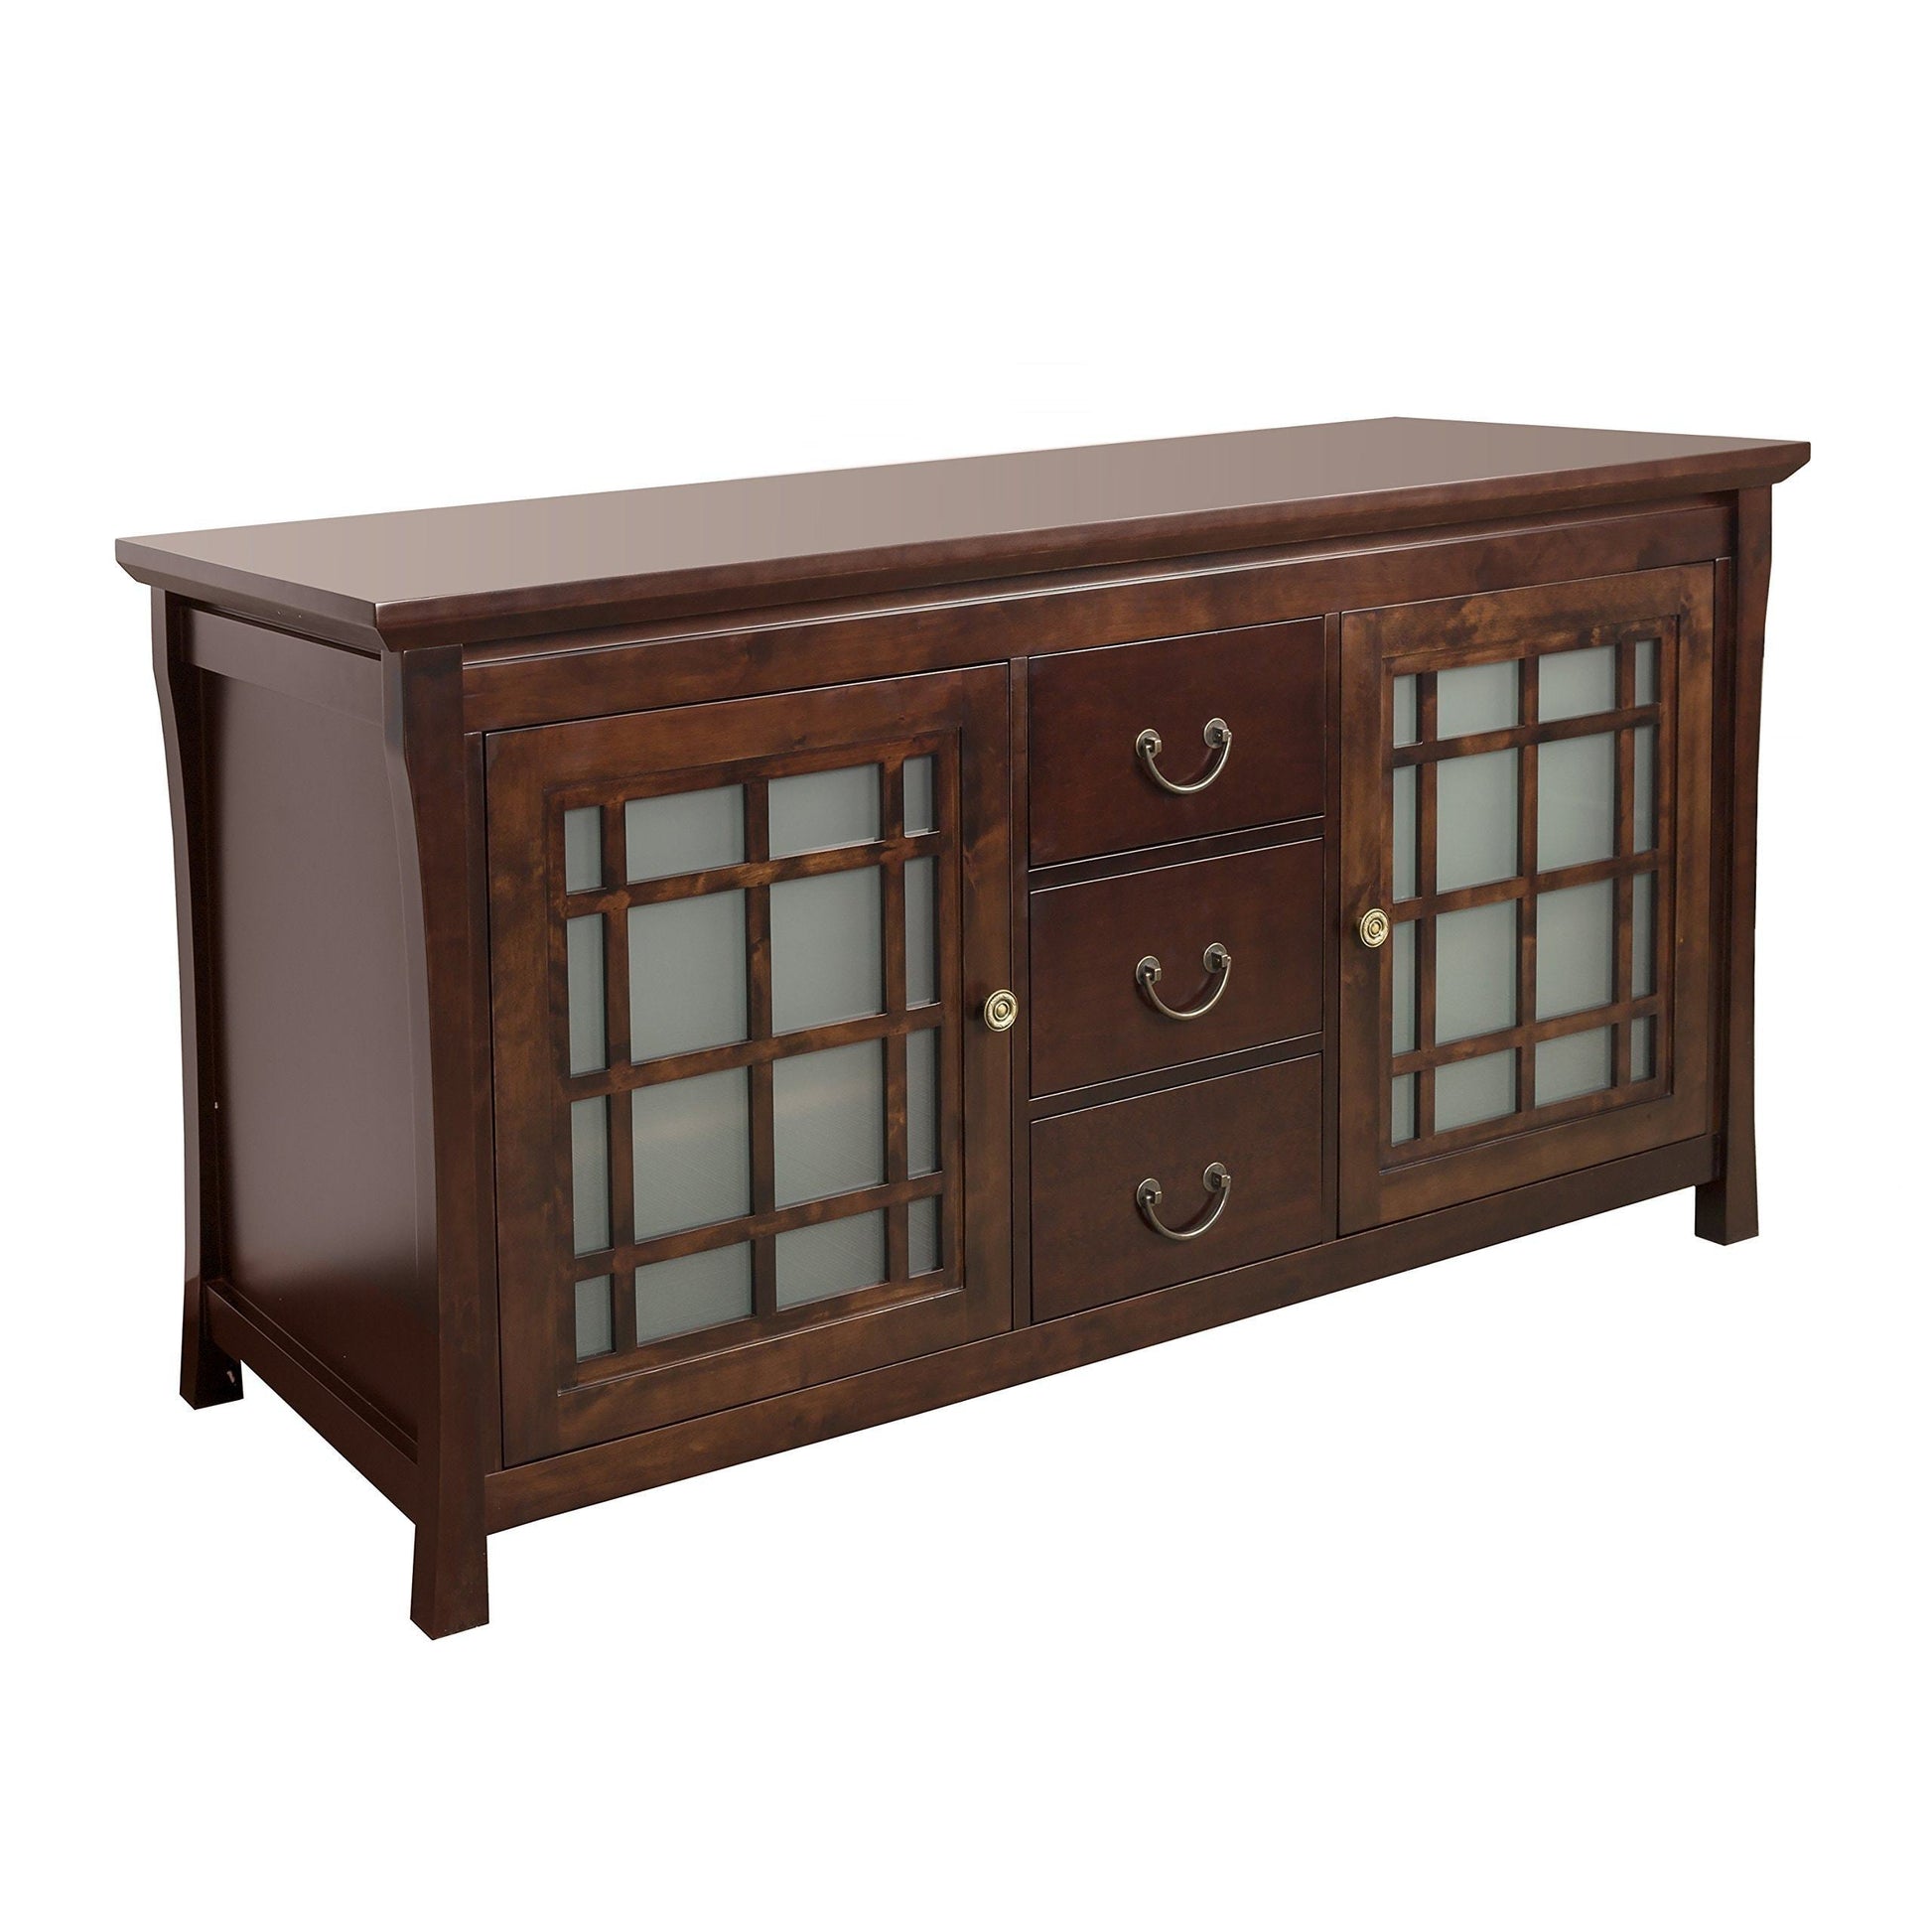 Top rated ronbow shoji 60 inch living room bathroom furniture in vintage walnut wood cabinet with three drawers wood countertop 040460 d f07_kit_1